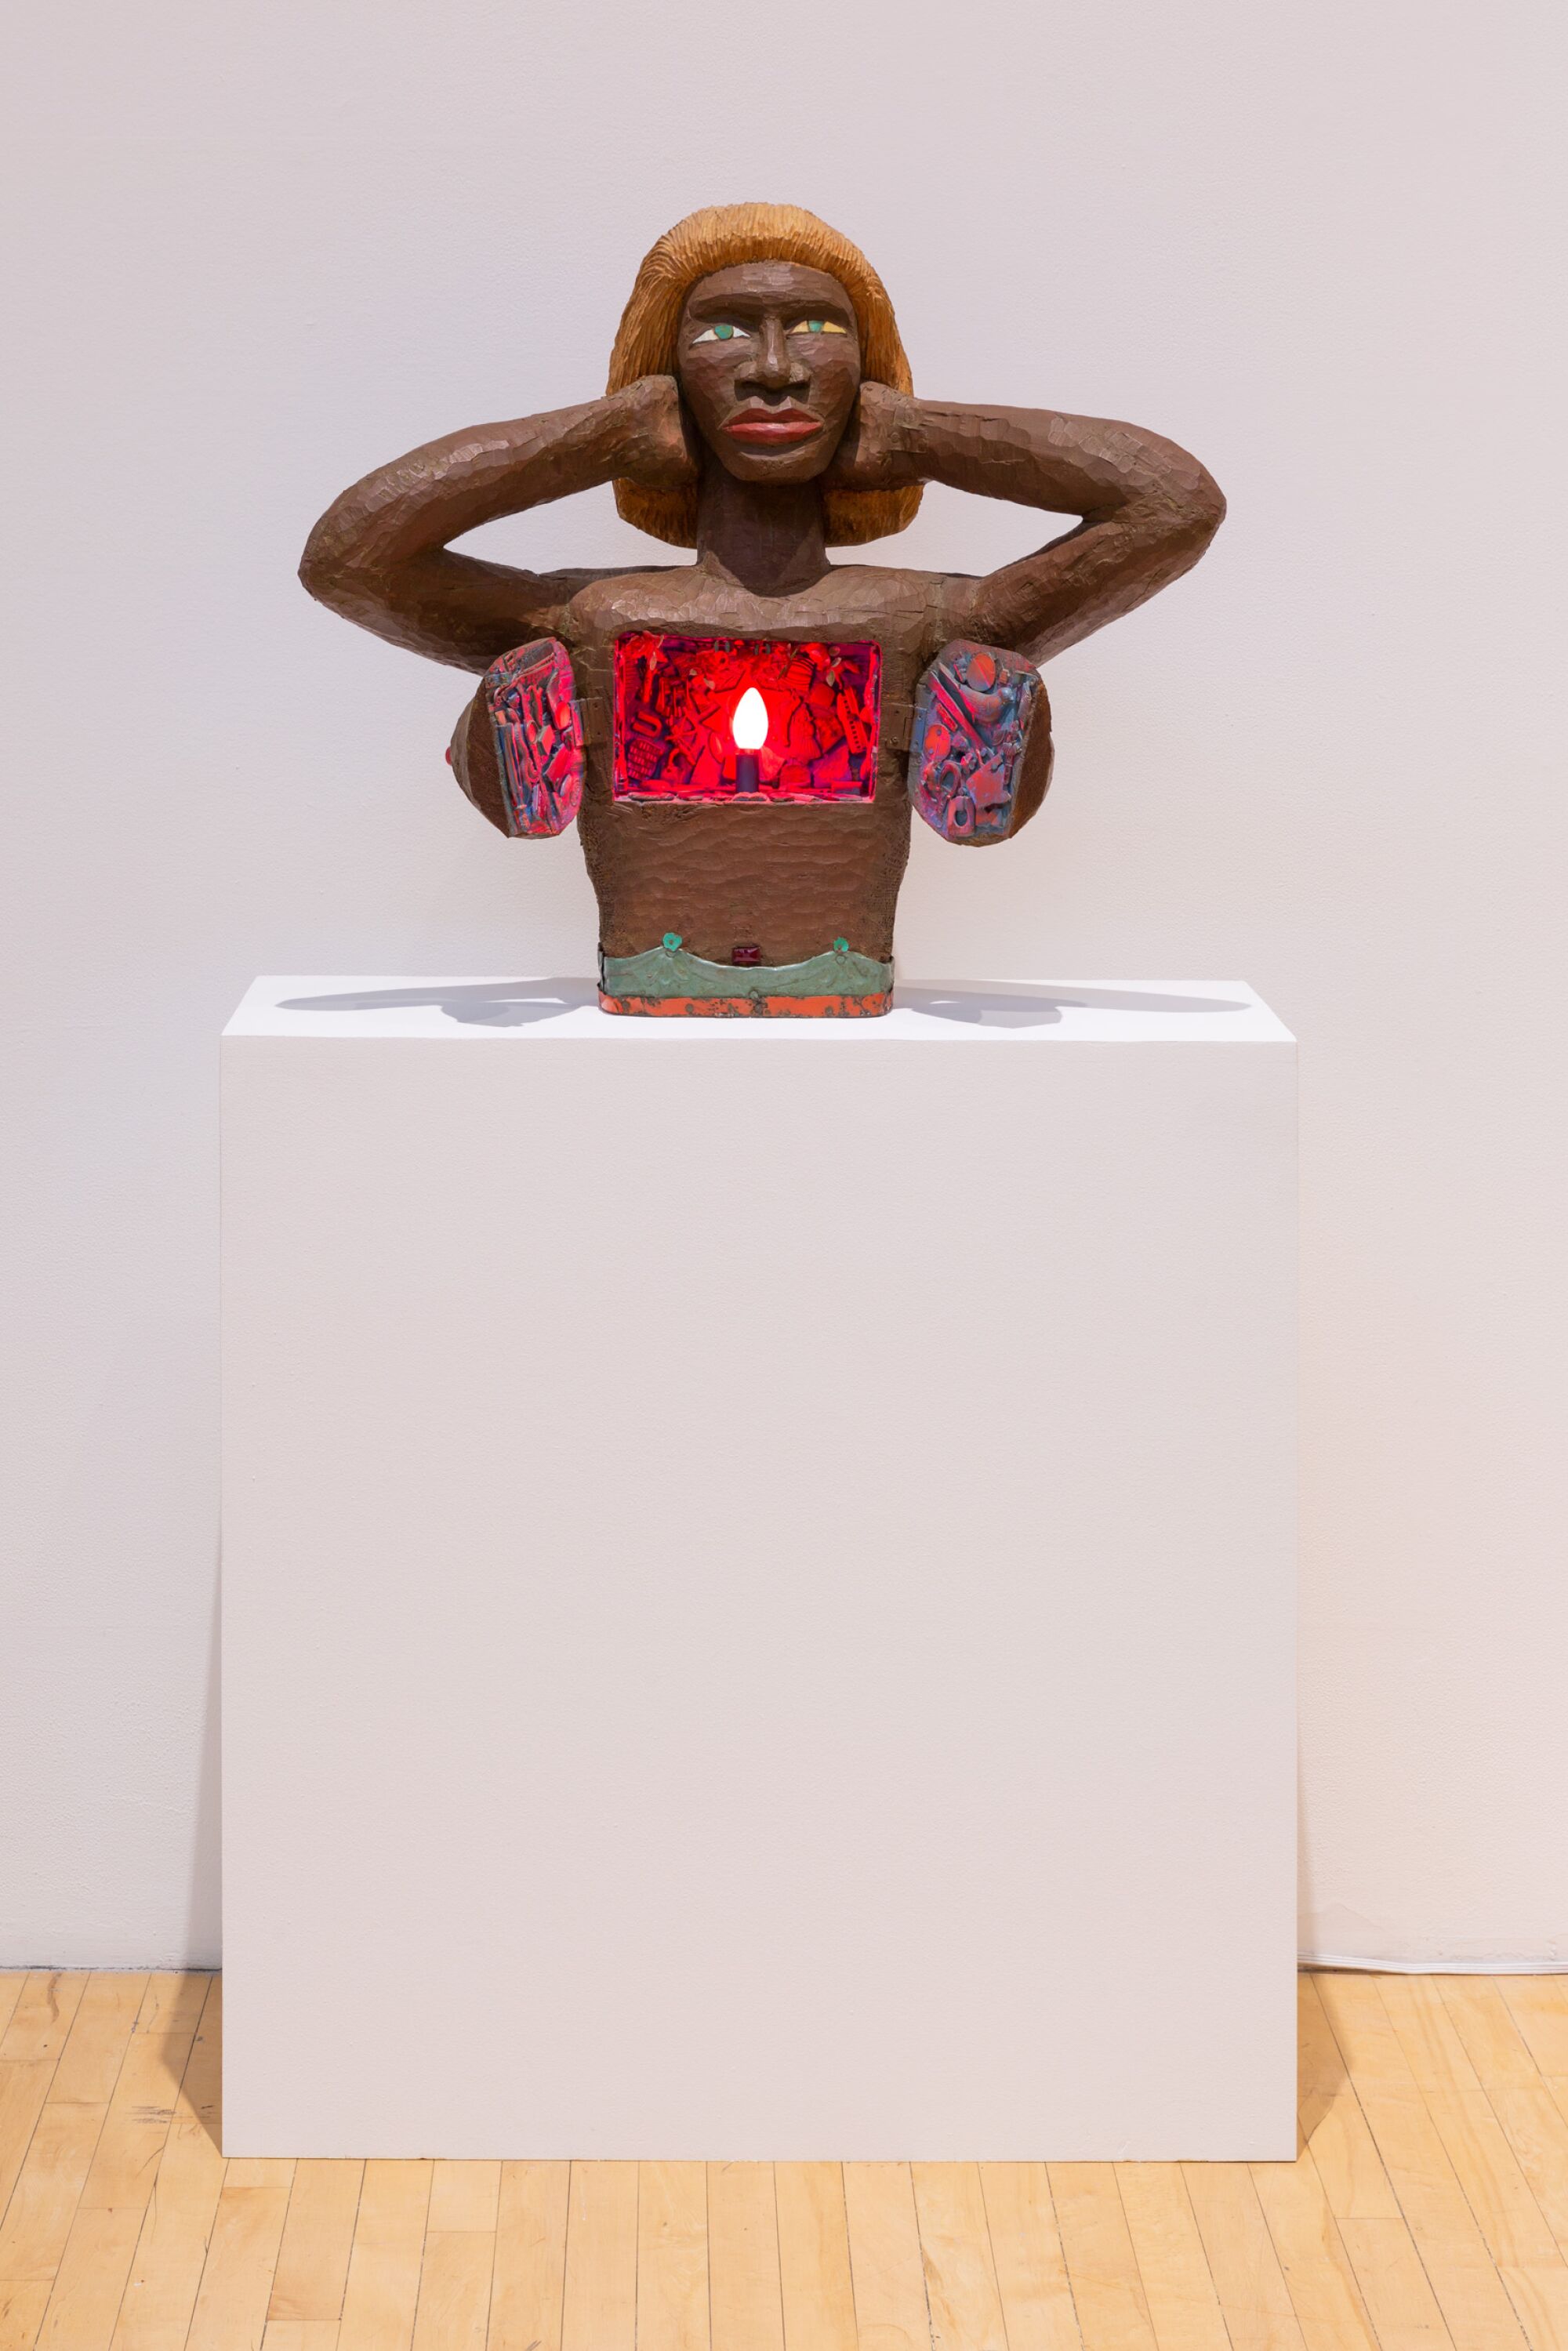 A wooden sculpture of a woman's torso opens at the chest to reveal a red illuminated light within